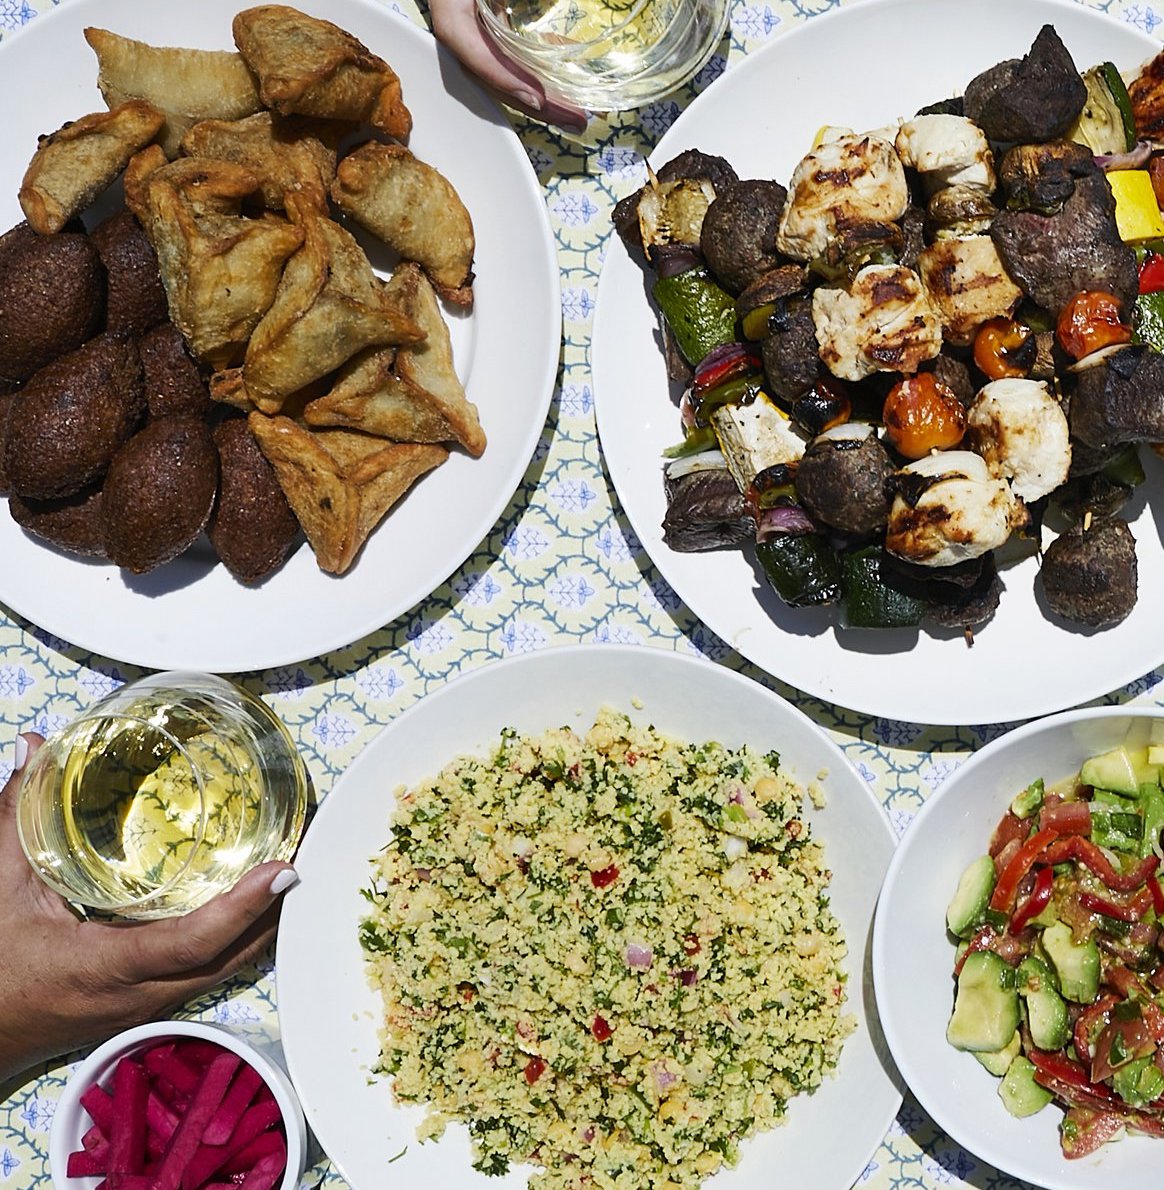 Overhead table spread of various mediterranean-themed foods and sides, with hands reaching in holding glasses of white wine